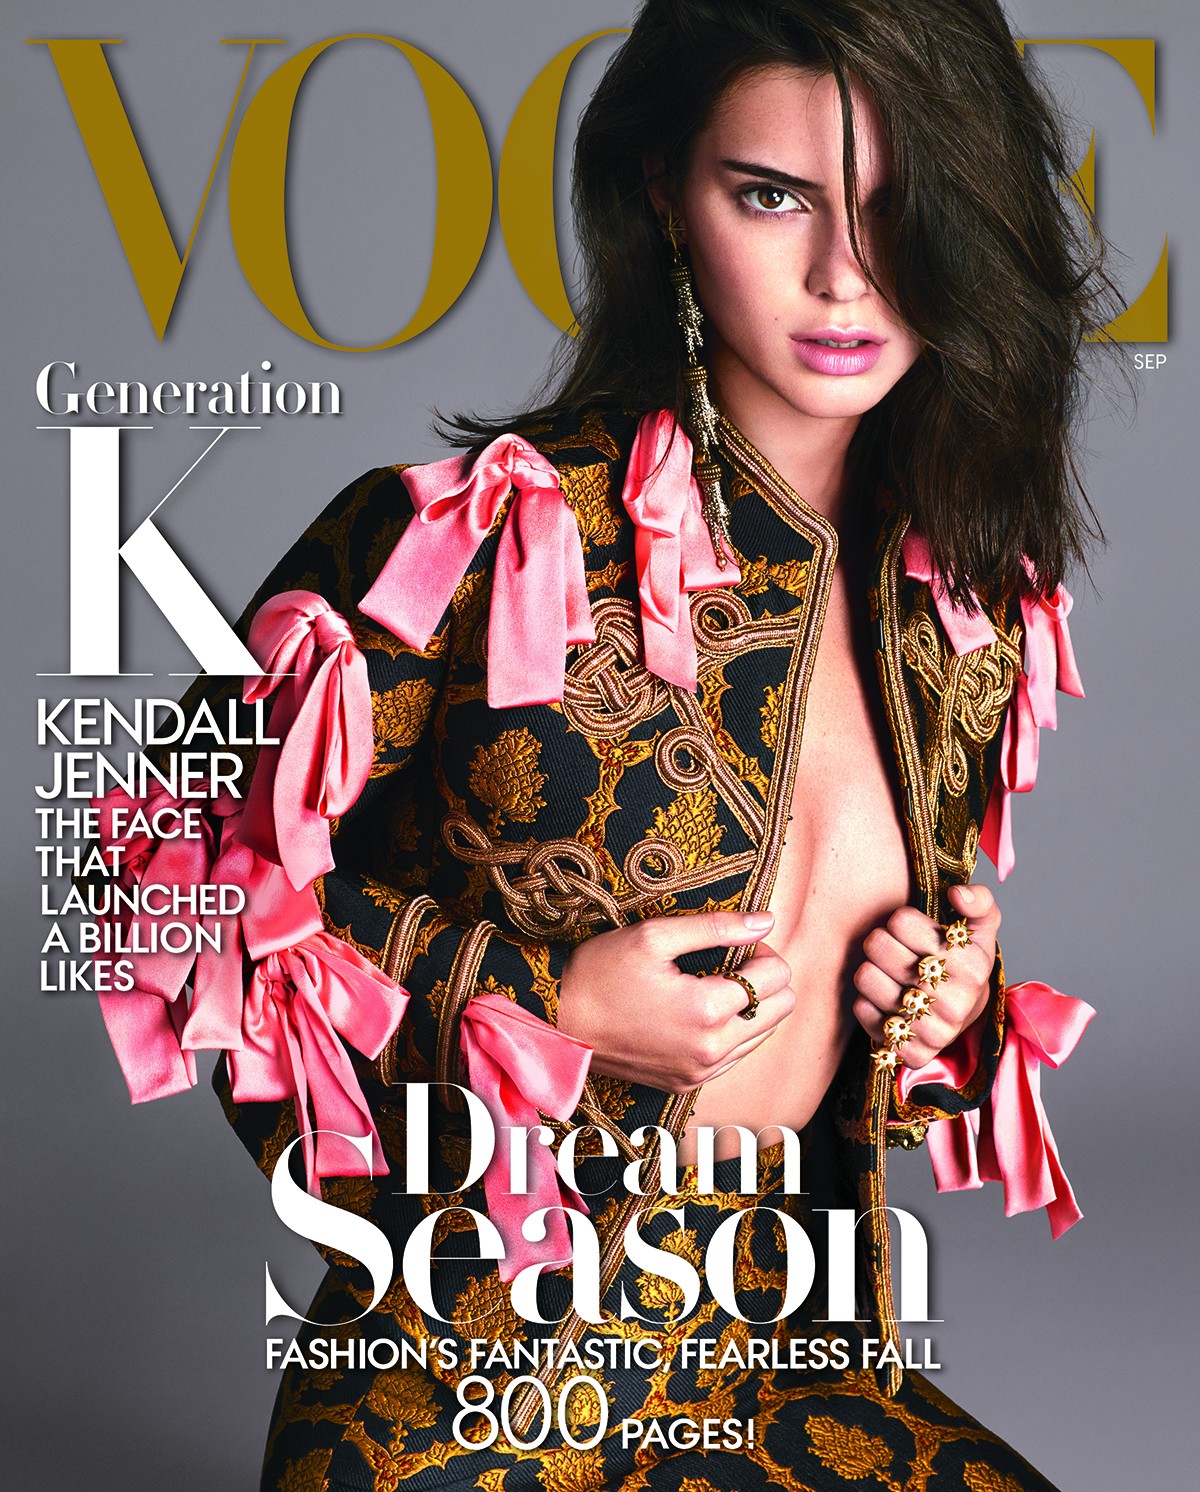 Kendall Jenner's Vogue September Issue Cover Is STUNNING | Who What Wear